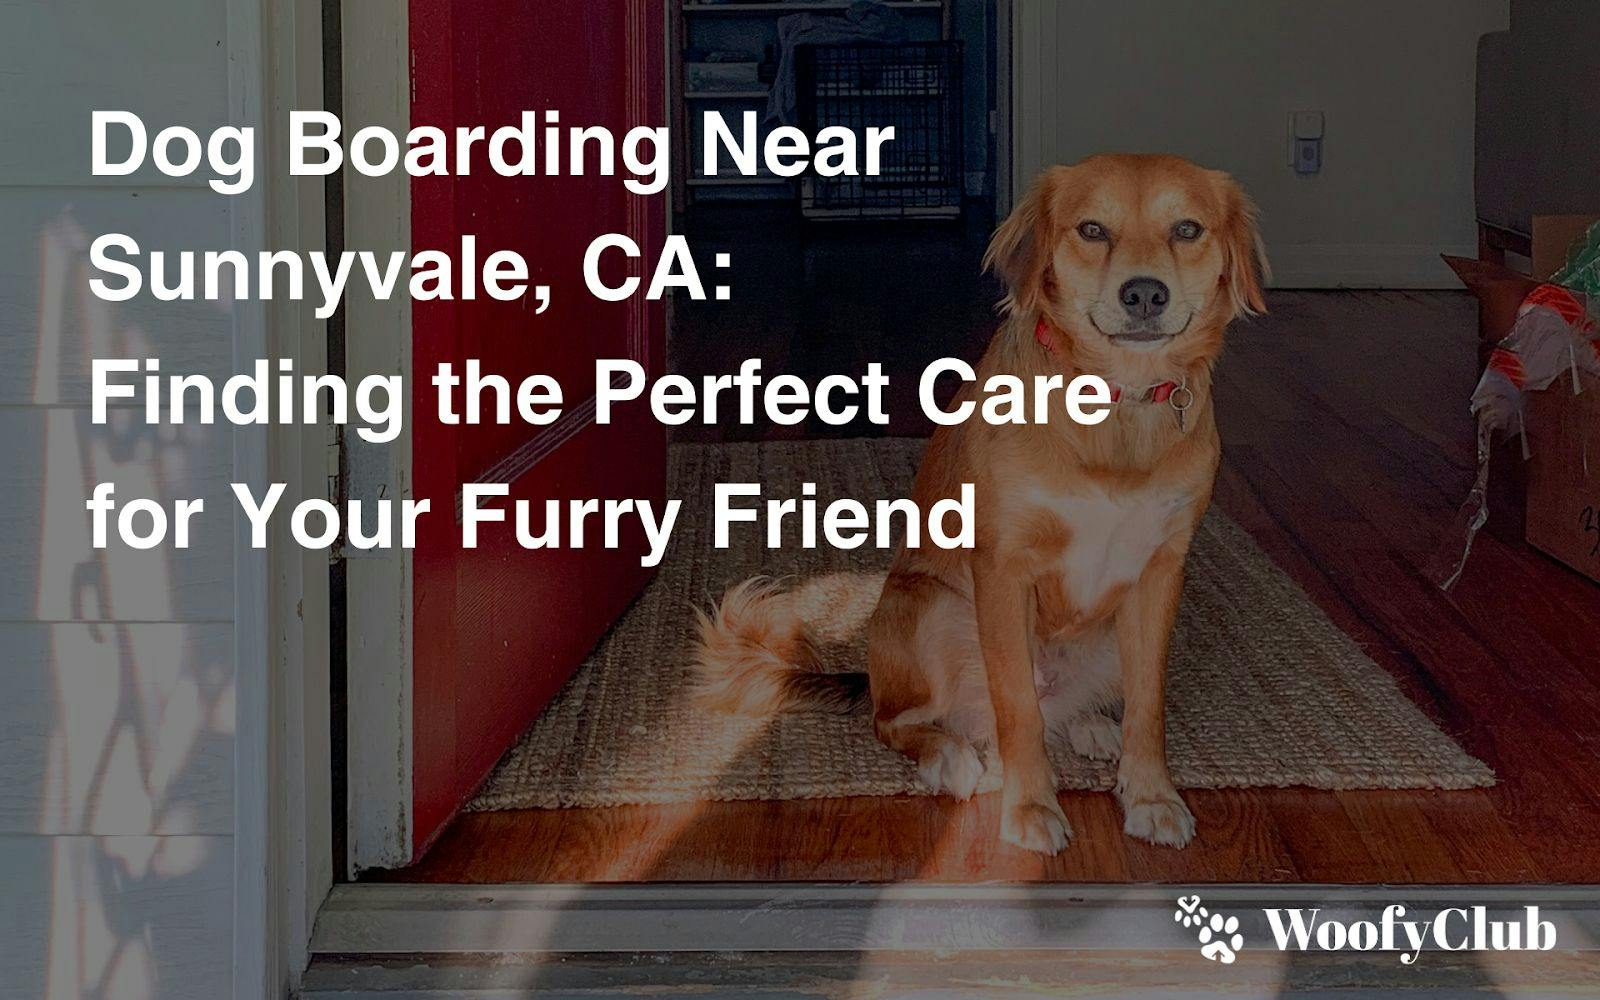 Dog Boarding Near Sunnyvale, CA: Finding The Perfect Care For Your Furry Friend